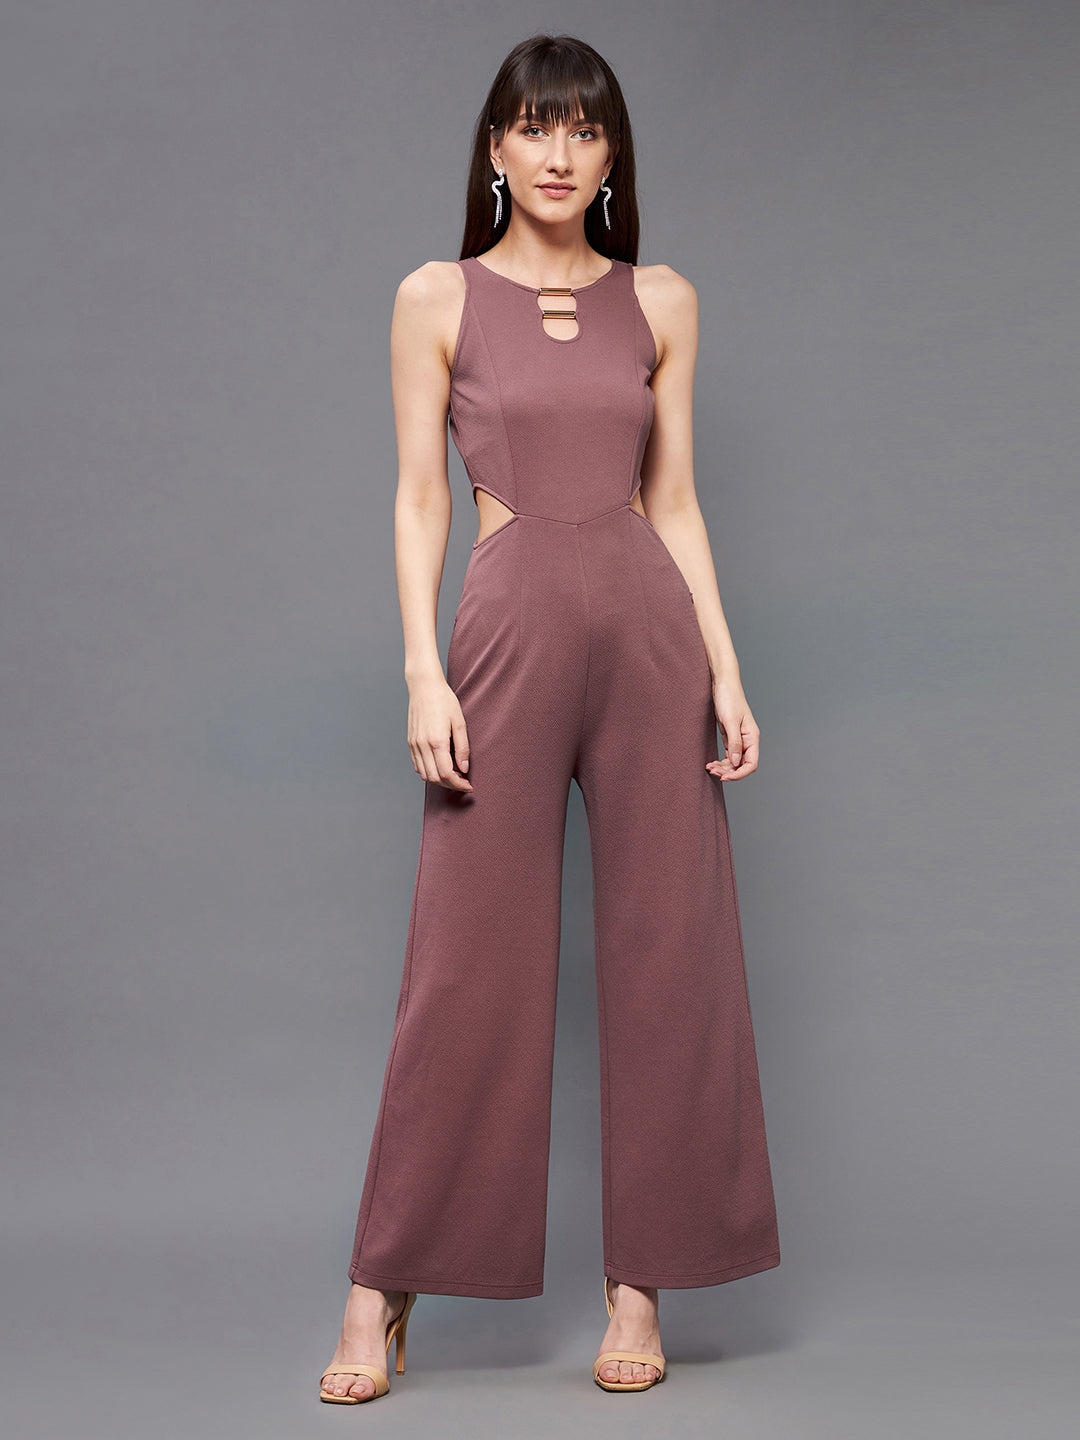 Mauve Round Sleeveless Polyester Solid Waist Cut-Out Regular  Jumpsuit